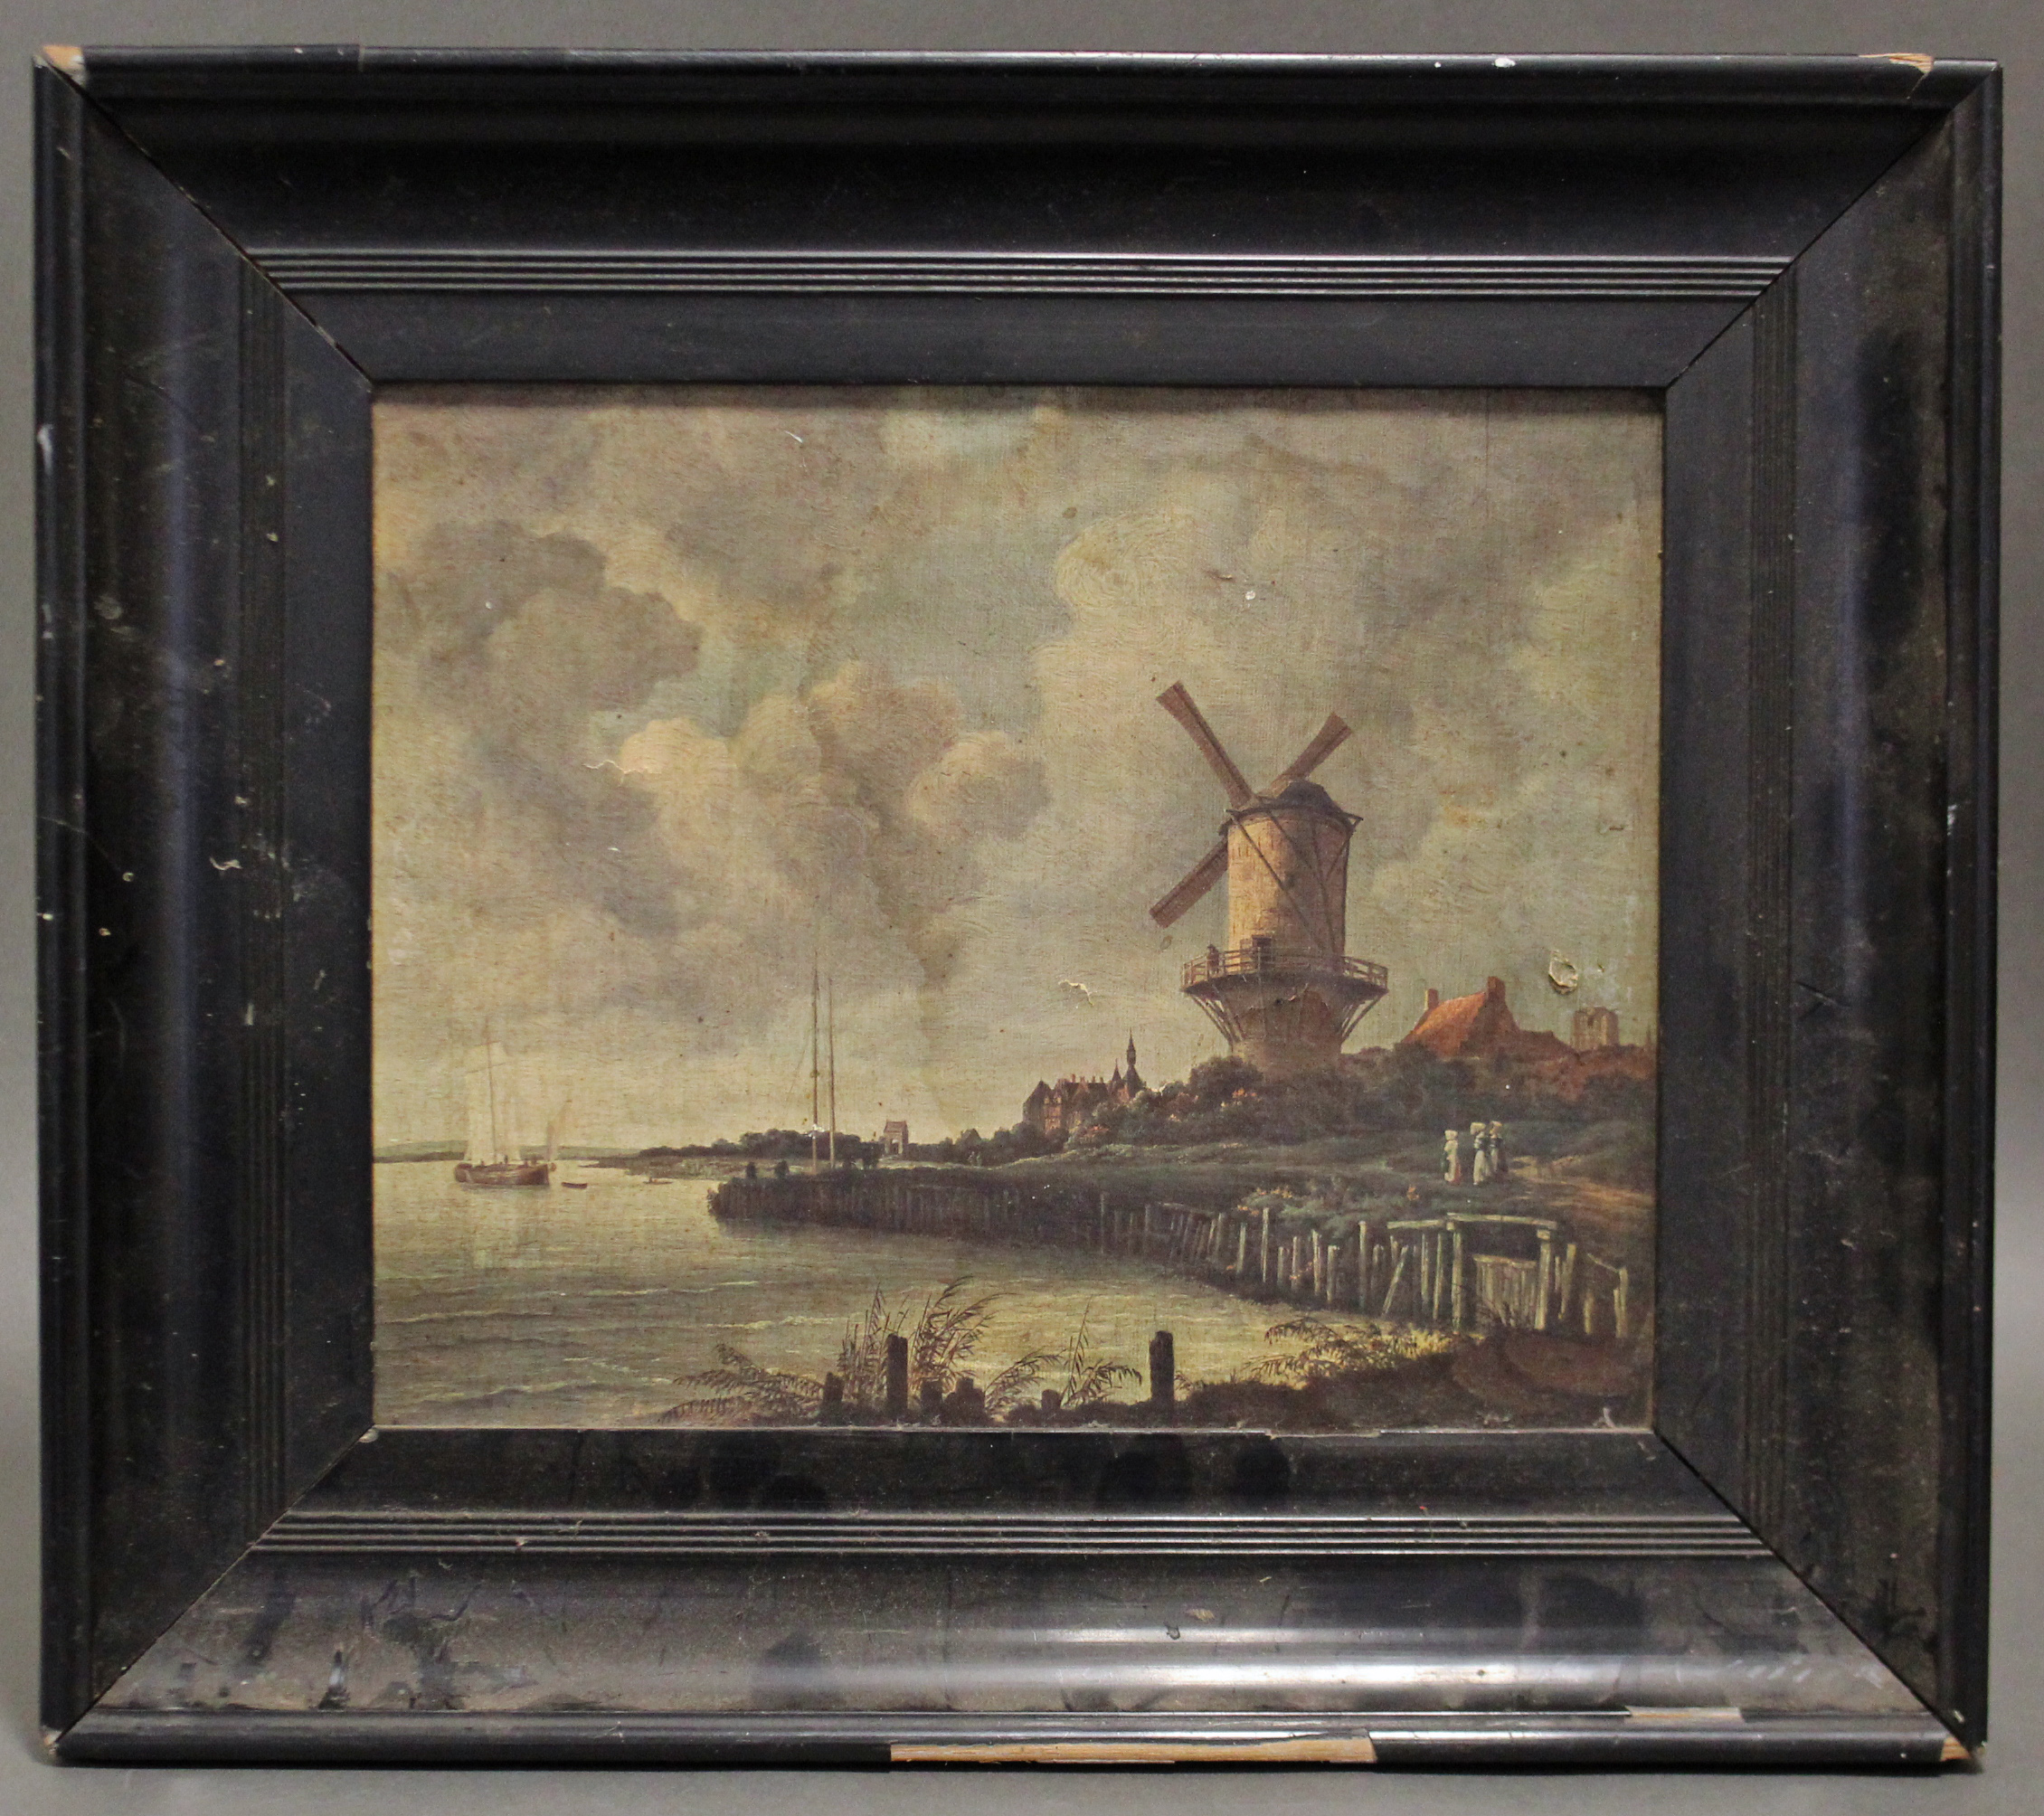 An overpainted print in oils after Jacob Van Ruisdael (1628-1682), titled: “The Mill at Wyk”. Canvas